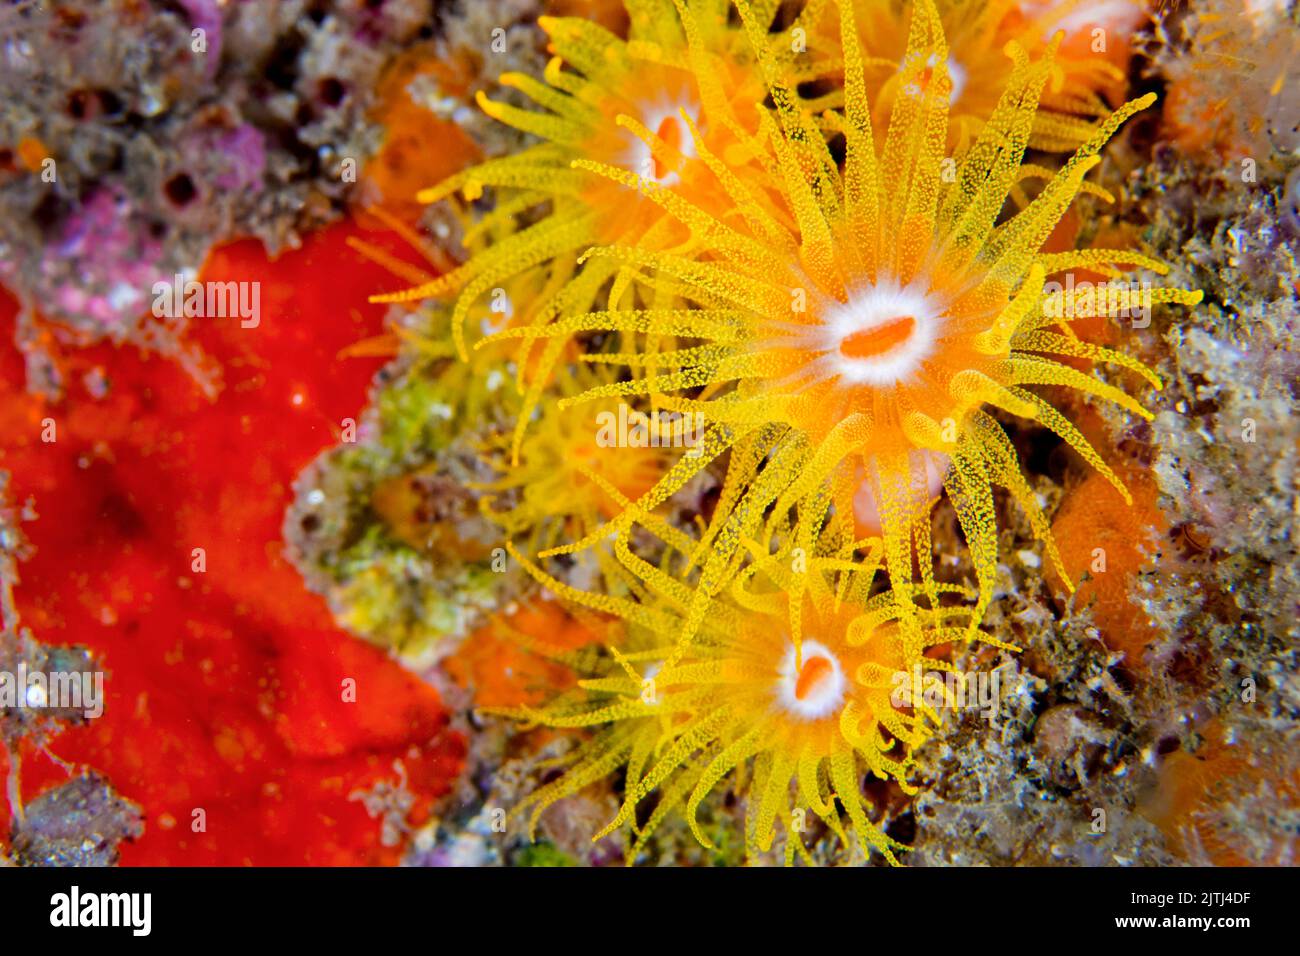 Anemone marino incrostante, Coral Reef, Lembeh, Sulawesi Settentrionale, Indonesia, Asia Foto Stock